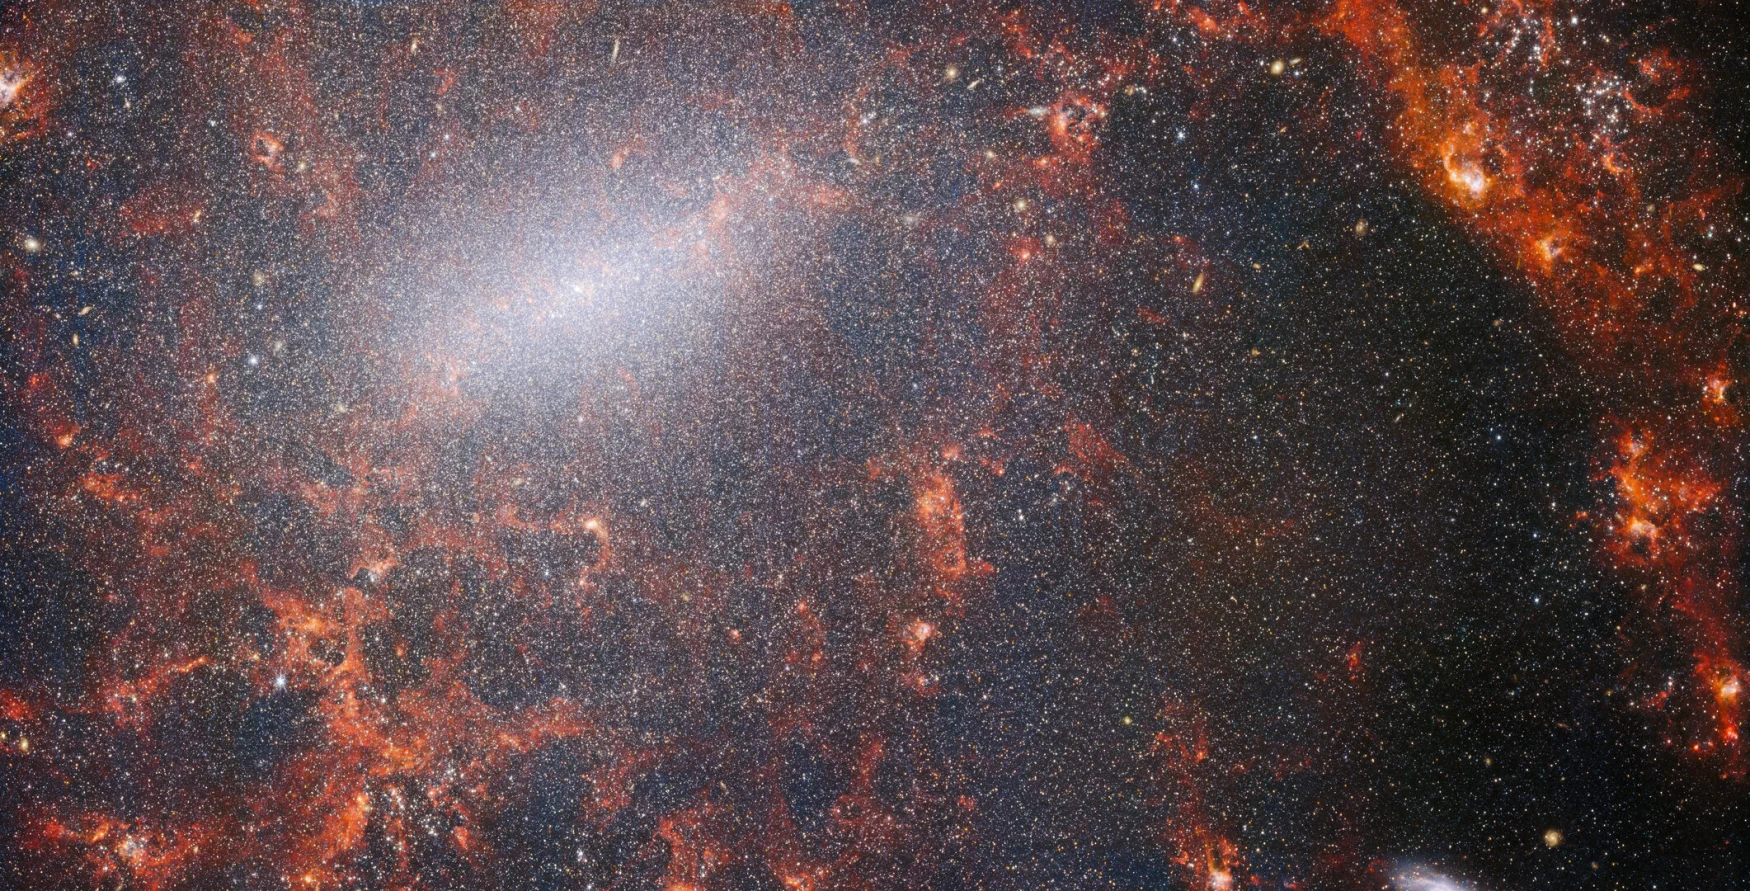 A delicate web of dust and bright star clusters runs through this image from the NASA/ESA/CSA James Webb Space Telescope. In this view from Webb's NIRCam instrument, the galaxy's vast numbers of stars are scattered, the densest along its central bright bar, and a blazing glow lit by the inner young stars. You can also see red gas clouds. The bright stars belong to barred spiral galaxy NGC 5068, located in the constellation Virgo about 17 million light-years from Earth.  This portrait of NGC 5068 is part of a campaign to create an Astronomical Vault, a repository of observations of star formation in nearby galaxies. Previous gems from this collection can be found here and here. These observations are of particular value to astronomers for two reasons.  First, star formation underpins so many areas of astronomy, from the physics of rarefied plasmas between stars to the evolution of entire galaxies. By observing star formation in nearby galaxies, astronomers hope to use some of the first data available from the web to initiate major scientific advances.  A second reason is that Webb's observations are based on other studies using telescopes such as NASA/ESA his Hubble Space Telescope and the world's most capable ground-based observatories. Webb collected images of 19 nearby star-forming galaxies, allowing astronomers to perform a catalog of 10,000 star clusters from Hubble, spectroscopic mapping of 20,000 star-forming emission nebulae from the Very Large Telescope (VLT), and We were able to combine it with 12,000 dark object observations.  , a dense molecular cloud identified by the Atacama Large Millimeter/Submillimeter Array (ALMA). These observations span the electromagnetic spectrum and give astronomers an unprecedented opportunity to piece together the details of star formation. Embedded in near-infrared images of this galaxy is the massive cluster of old stars that make up the core of NGC 5068.  NIRCam's sharp field of view allows astronomers to peer through the galaxy's gas and dust into its stars. Dense and bright dust clouds lie along the path of the spiral arms. These are H II regions, conglomerates of hydrogen gas where new stars are forming. Young, energetic stars ionize the hydrogen around them, combining with hot dust emissions to produce this reddish glow.  The H II regions are attractive targets for astronomers, and Webb's instrument is the perfect tool for examining them, resulting in this image. [Image Description: A close-in image of a spiral galaxy, showing its core and part of a spiral arm. At this distance thousands upon thousands of tiny stars that make up the galaxy can be seen. The stars are most dense in a whitish bar that forms the core, and less dense out from that towards the arm. Bright red gas clouds follow the twist of the galaxy and the spiral arm.] Links NGC 5068 (NIRCam+MIRI images) NGC 5068 (MIRI images) Slider tool (MIRI and NIRCam images) Video: NGC 5068 overview Video: NGC 5068 web view (MIRI and NIRCam images) Video: Zoom in on NGC 5068 